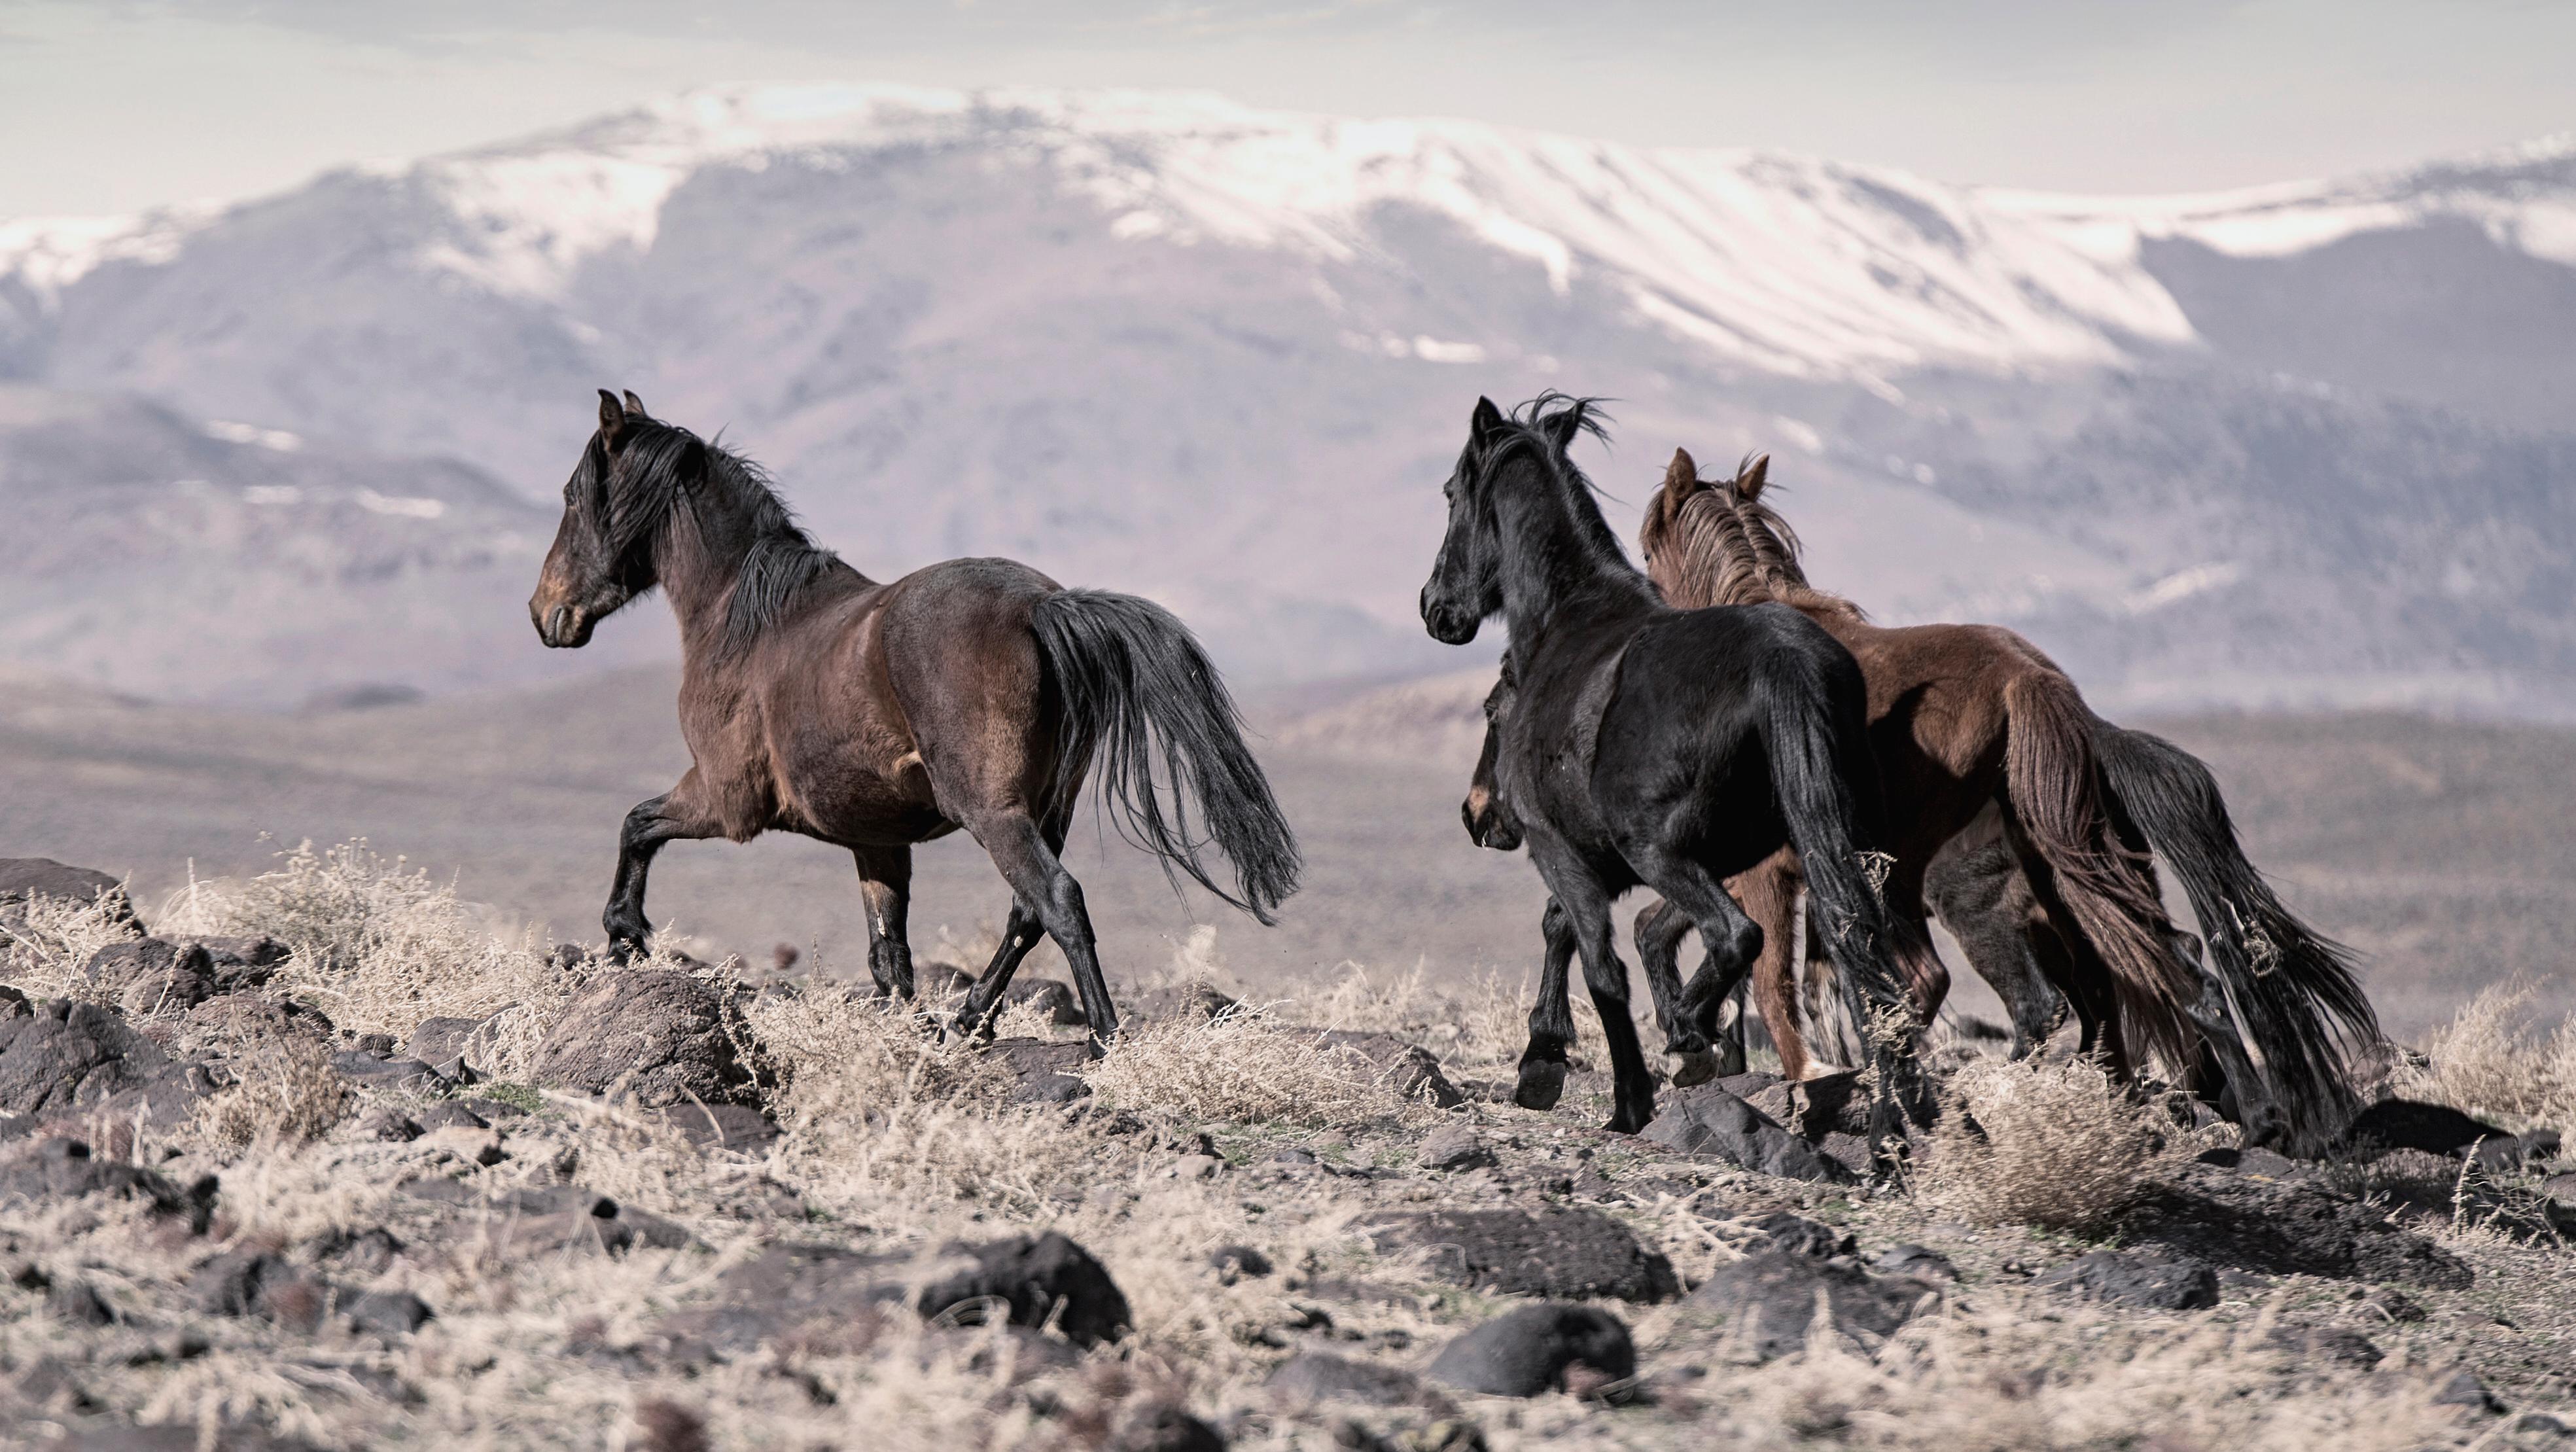 Black and White Photograph Shane Russeck - Photographie d'art « On the Go » 40x55 « Wild Horses, Mustangs »